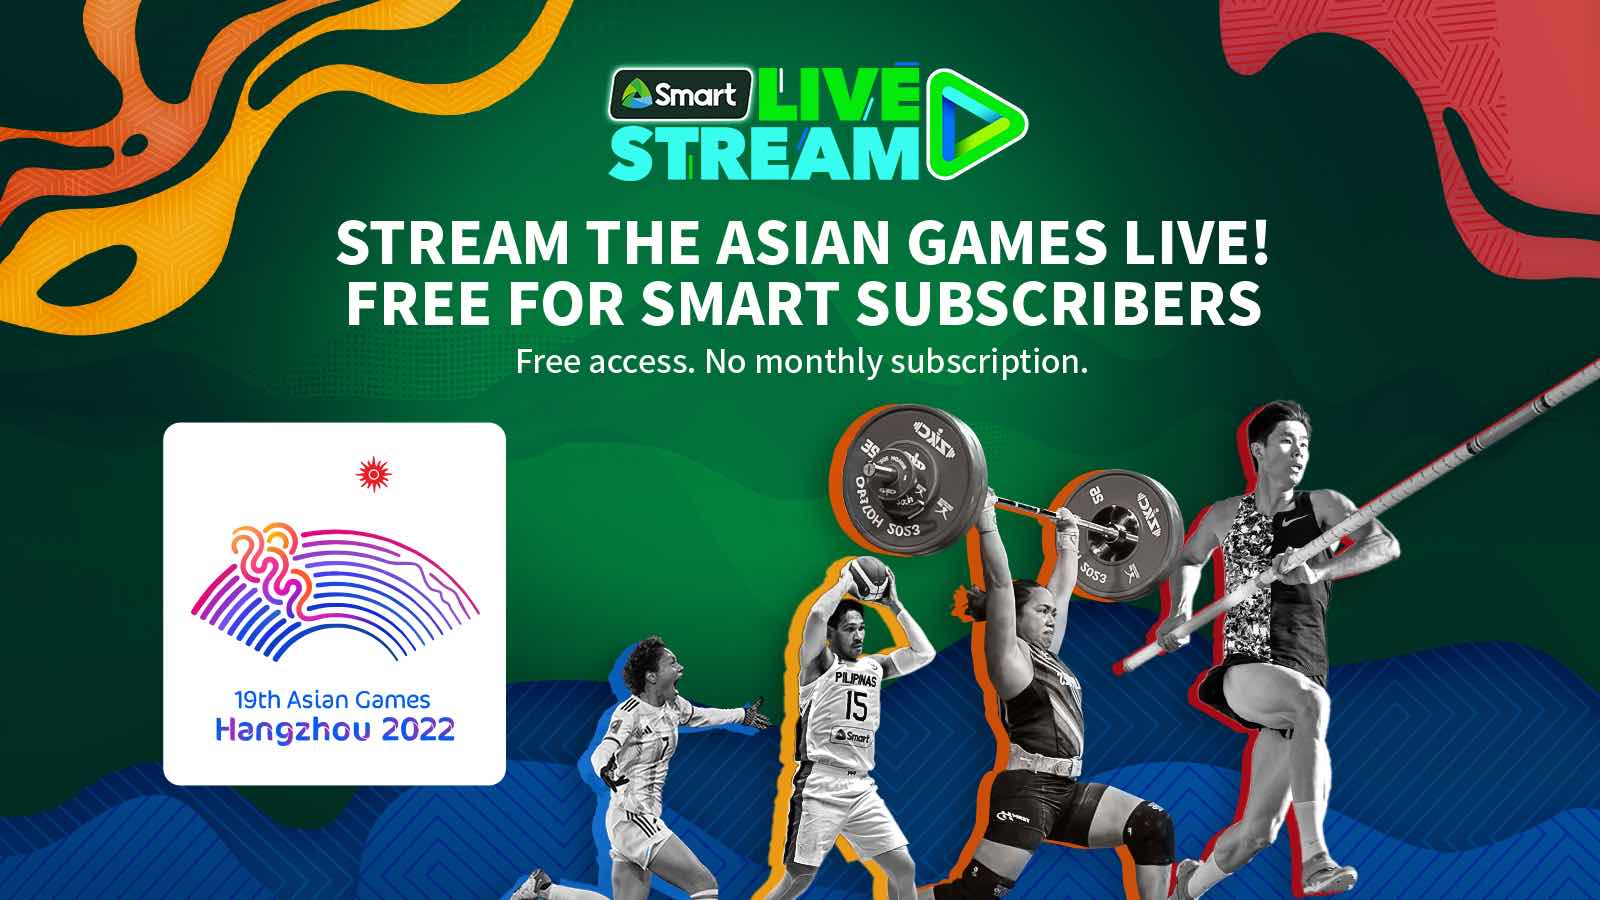 Filipino sports fans can watch the 19th Asian Games through the Smart LiveStream App.